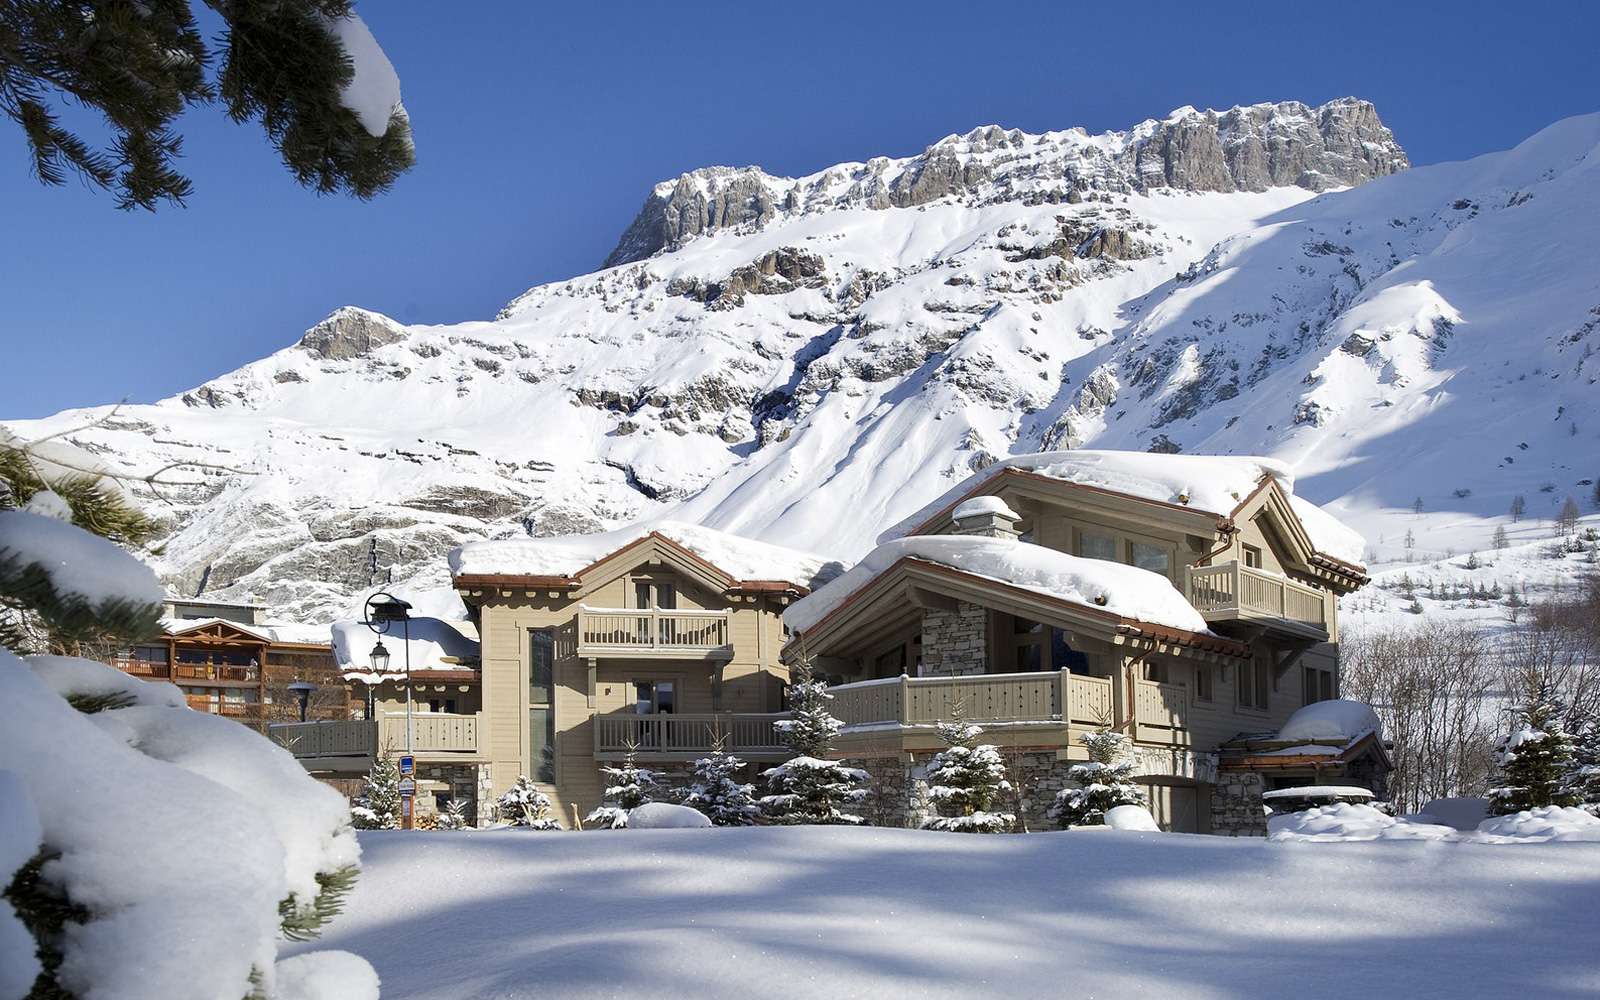 Kings-avenua-val-disere-snow-chalet-childfriendly-hammam-swimming-pool-covered-parking-cinema-boot-heaters-fireplace-area-val-disere-014-2